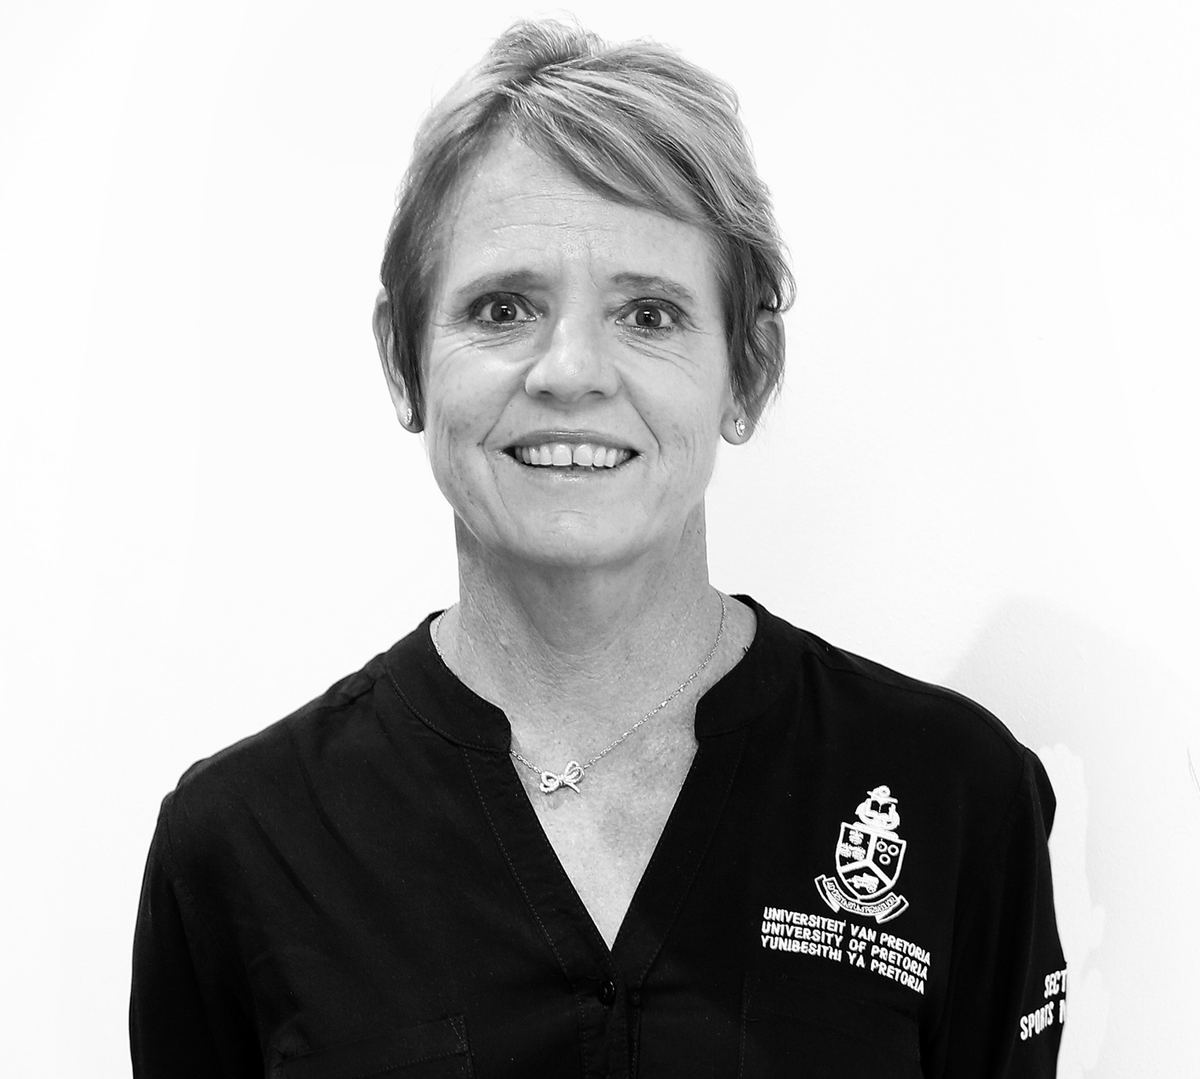 #HighPerformanceCentre: #ProudlyUP

Congratulations to Prof @ChristaJVR on attaining a C2 rating from the National Research Foundation - NFR.

She is the Head of the Section Sports Medicine Department in the School of Medicine at @UPTuks.

[Photo credit: #regcaldecott]